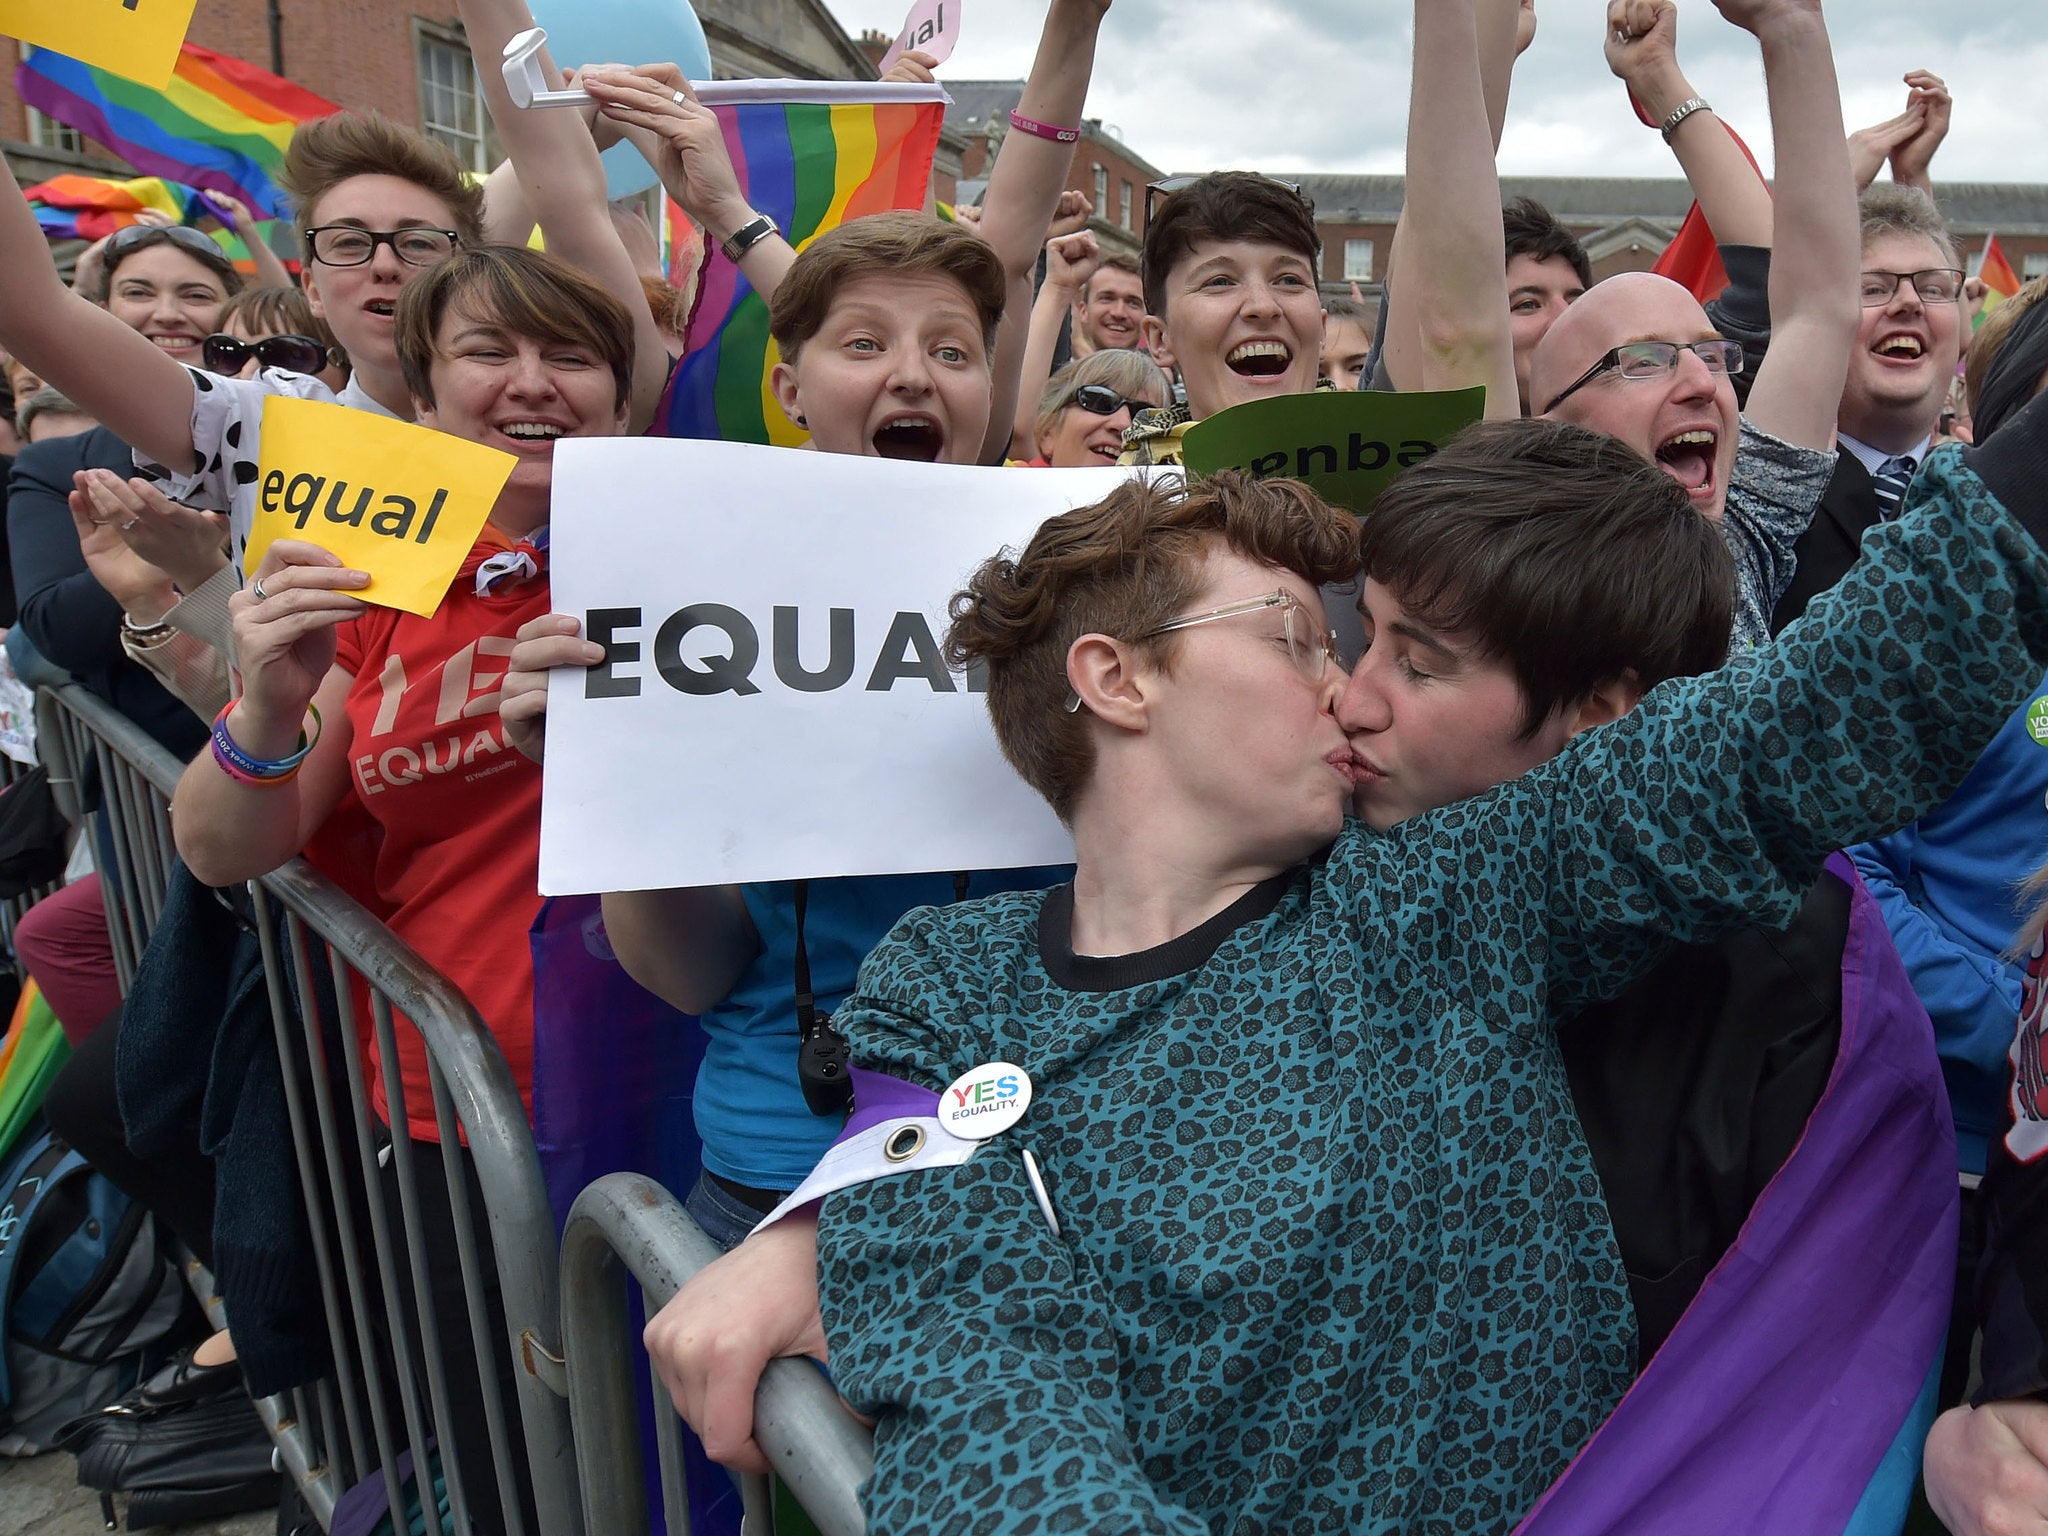 Ireland voted overwhelmingly in favour of same-sex marriage